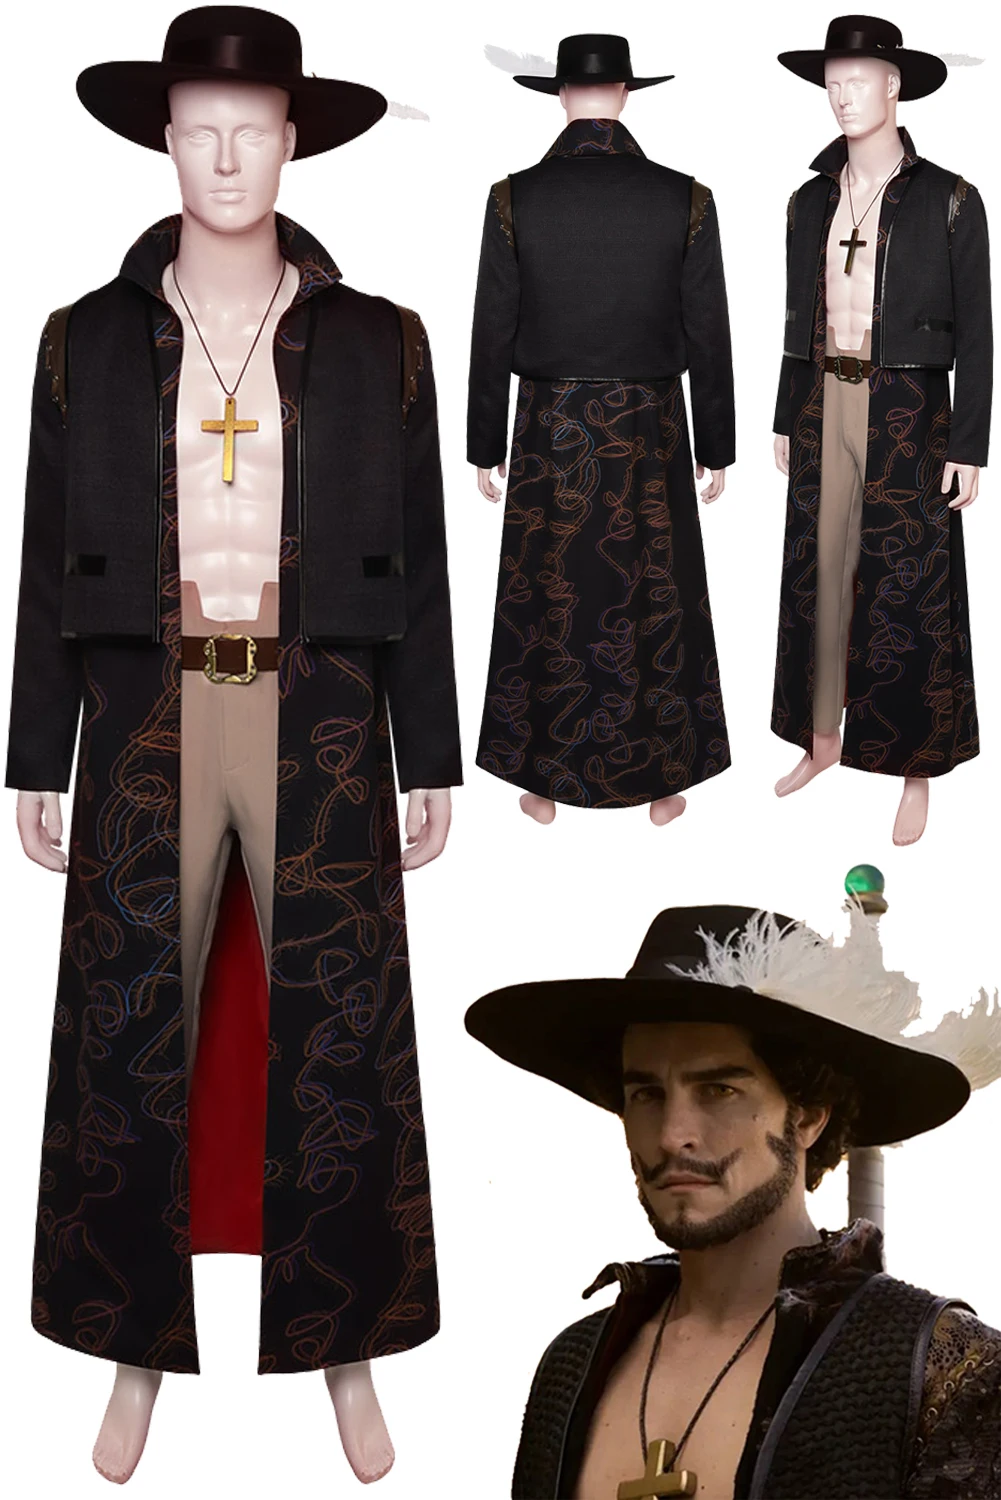 

Dracule Mihawk Cosplay Role Play Coat Hat Live Action TV One Cosplay Piece Costume Adult Men Fantasy Fancy Dress Up Party Cloth